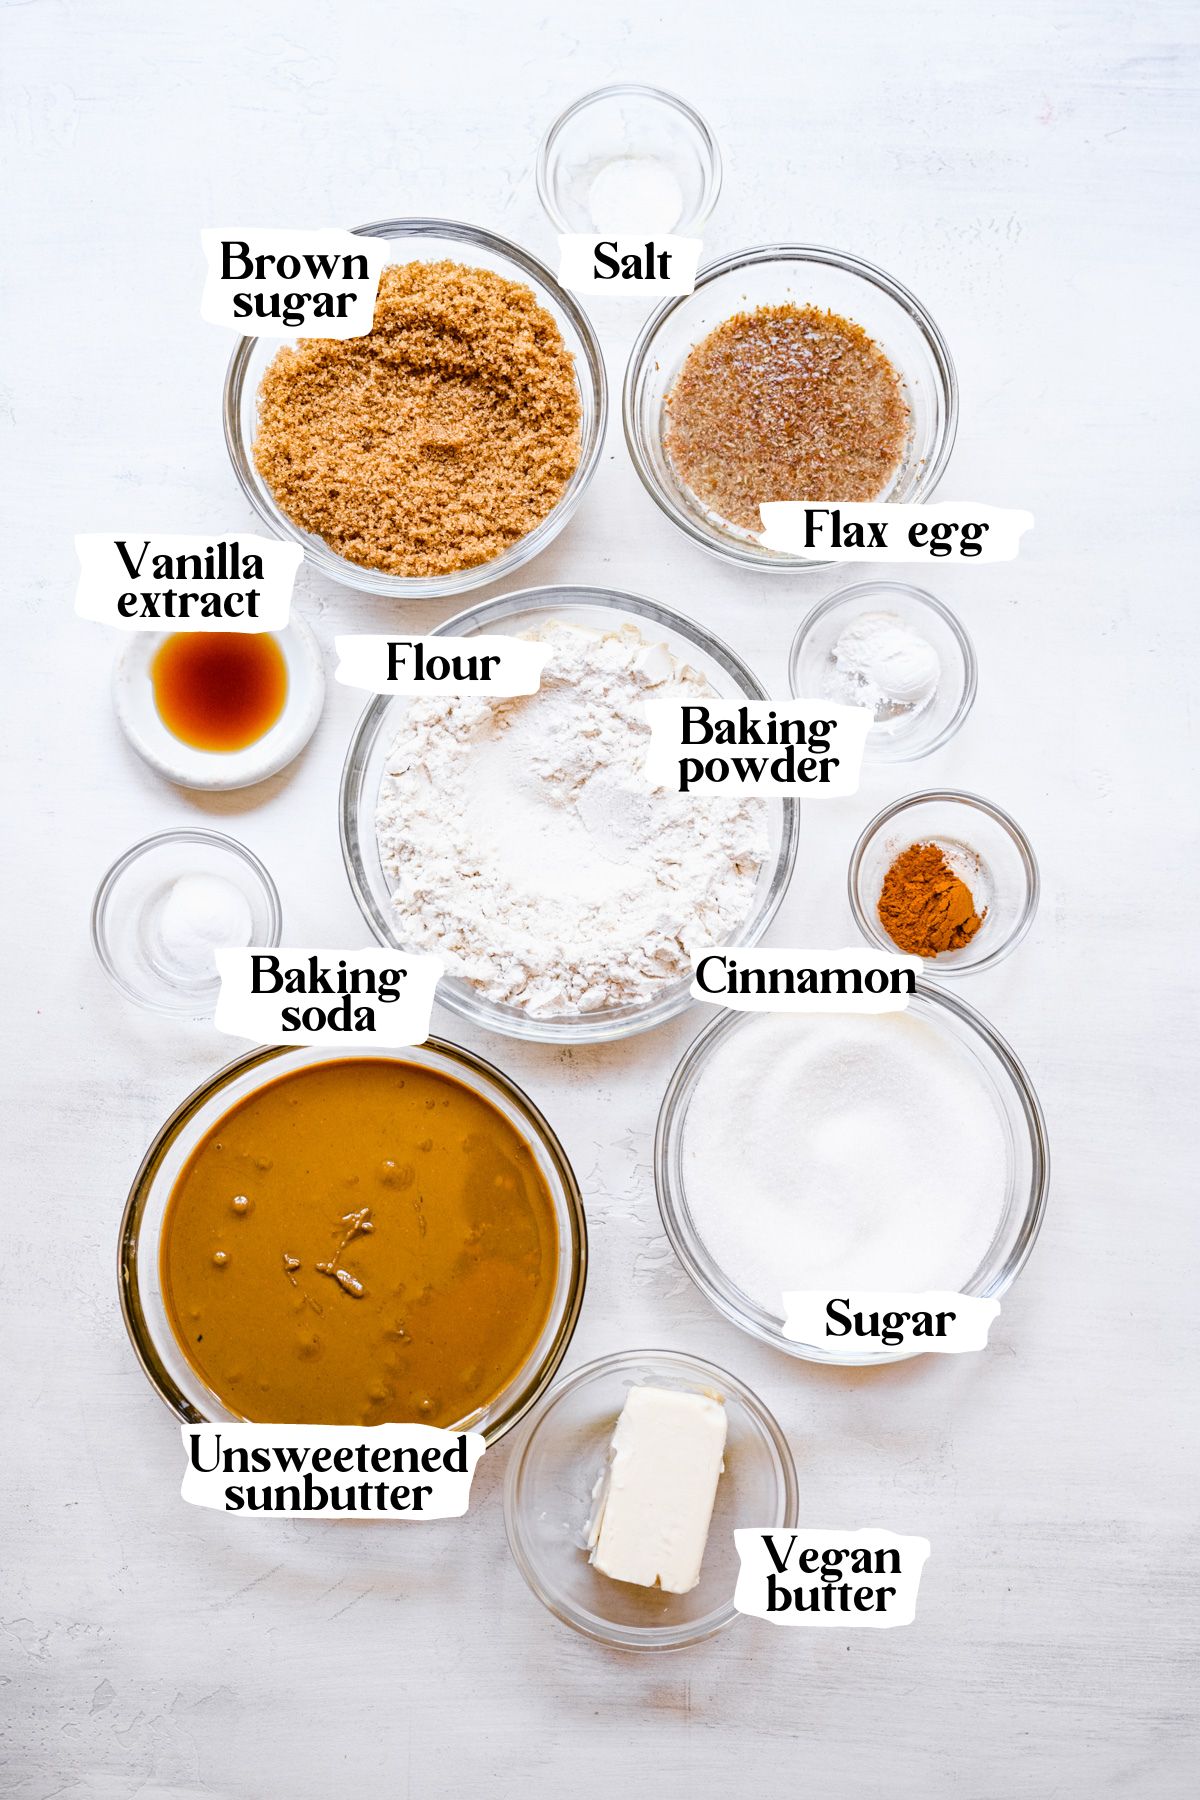 Sunbutter cookie ingredients including flour, sugar and a flax egg.